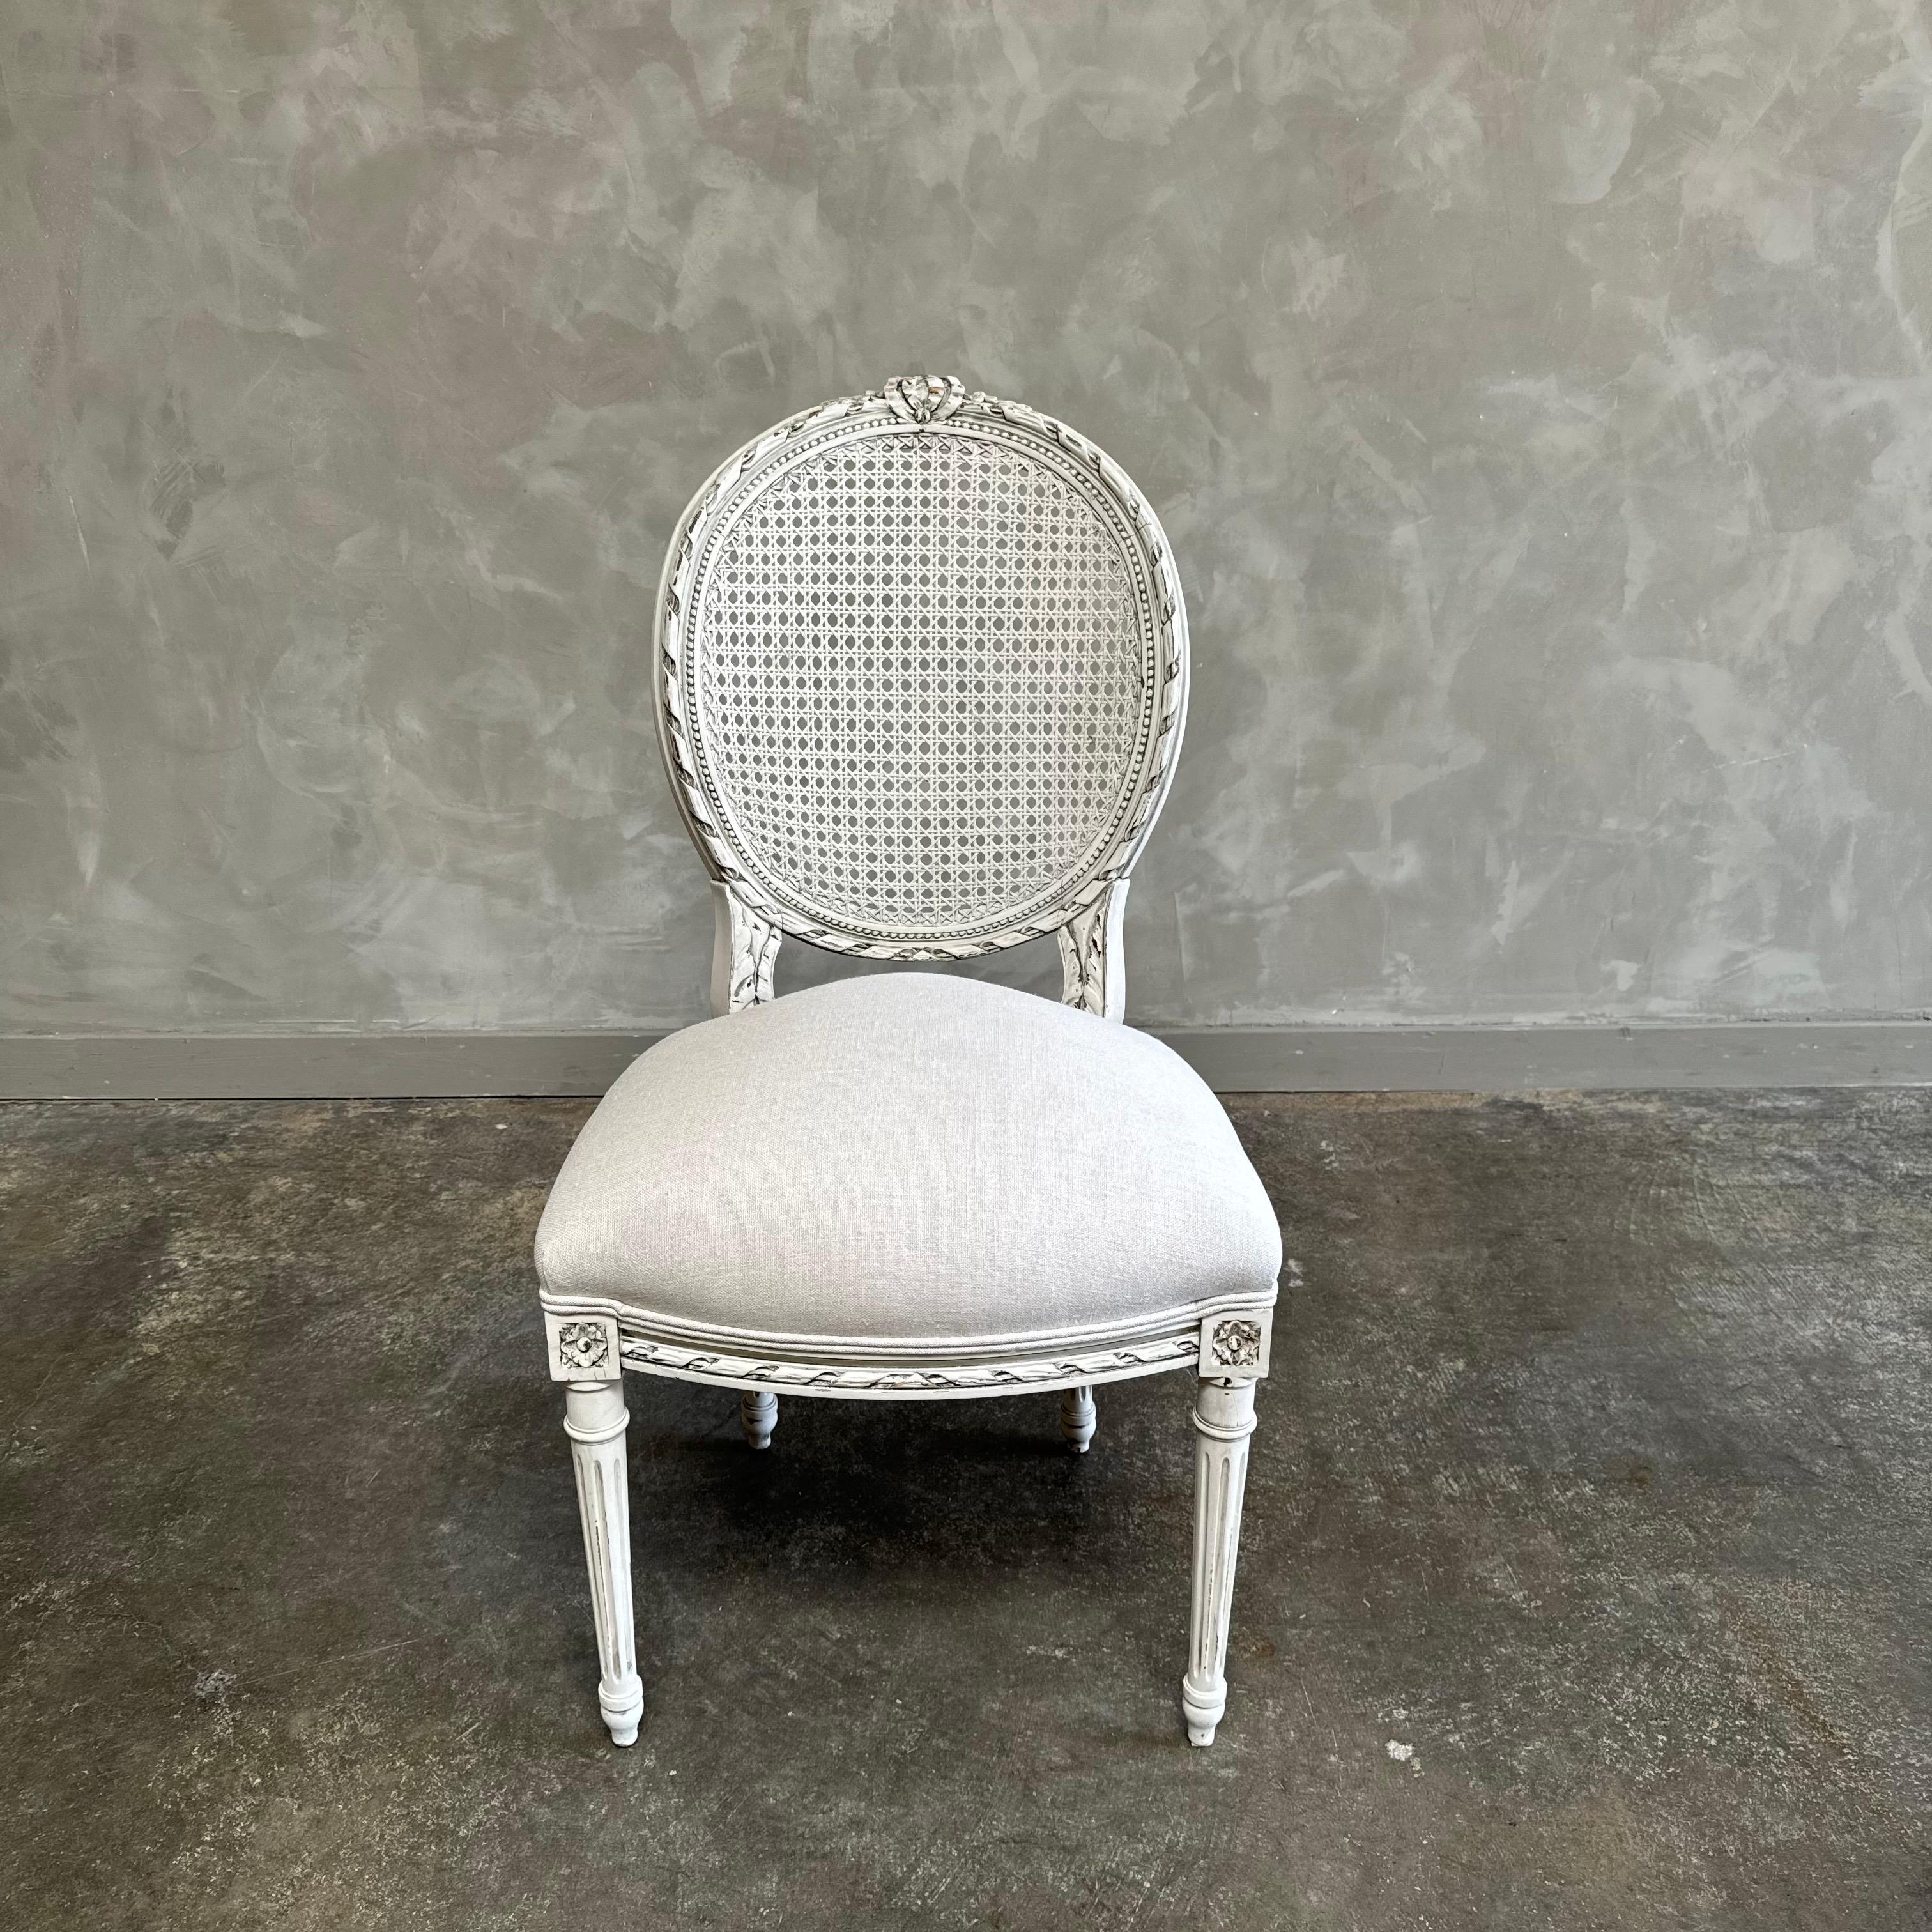 Antique French Louis XVI Style Cane chair painted in a french oyster white finish with subtle distress edges, finished with an antique patina. Cane back, solid and sturdy ready for everyday use.
Cane in good strong condition. Antique chair 20”w x